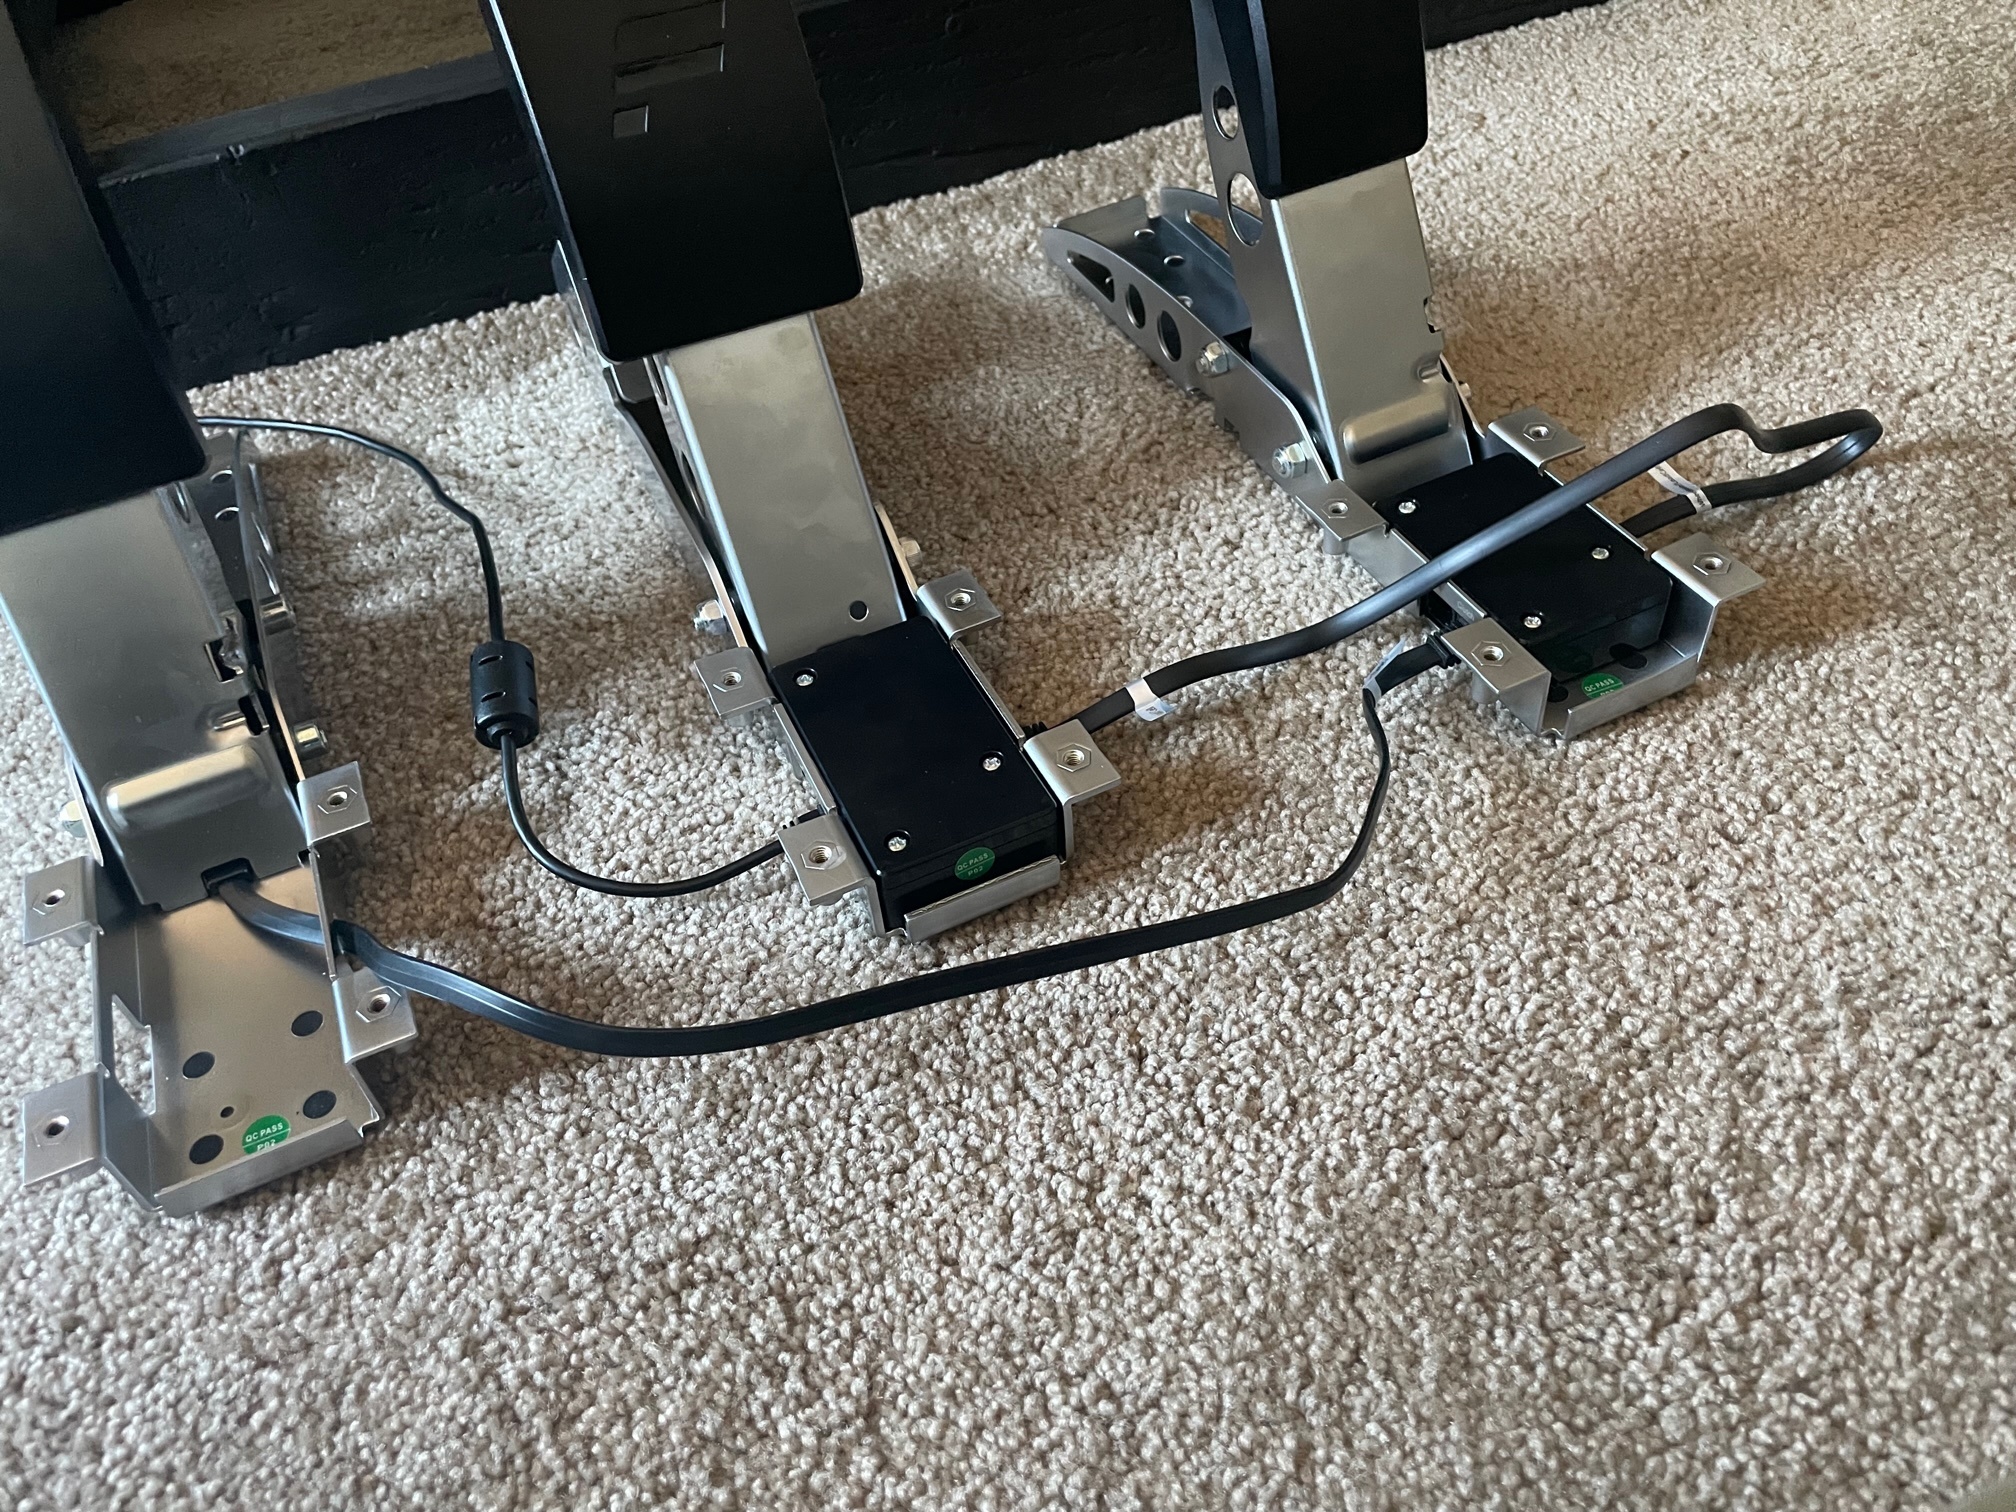 CSL pedals (with Loadcell) not working on new DD Pro — Fanatec Forum